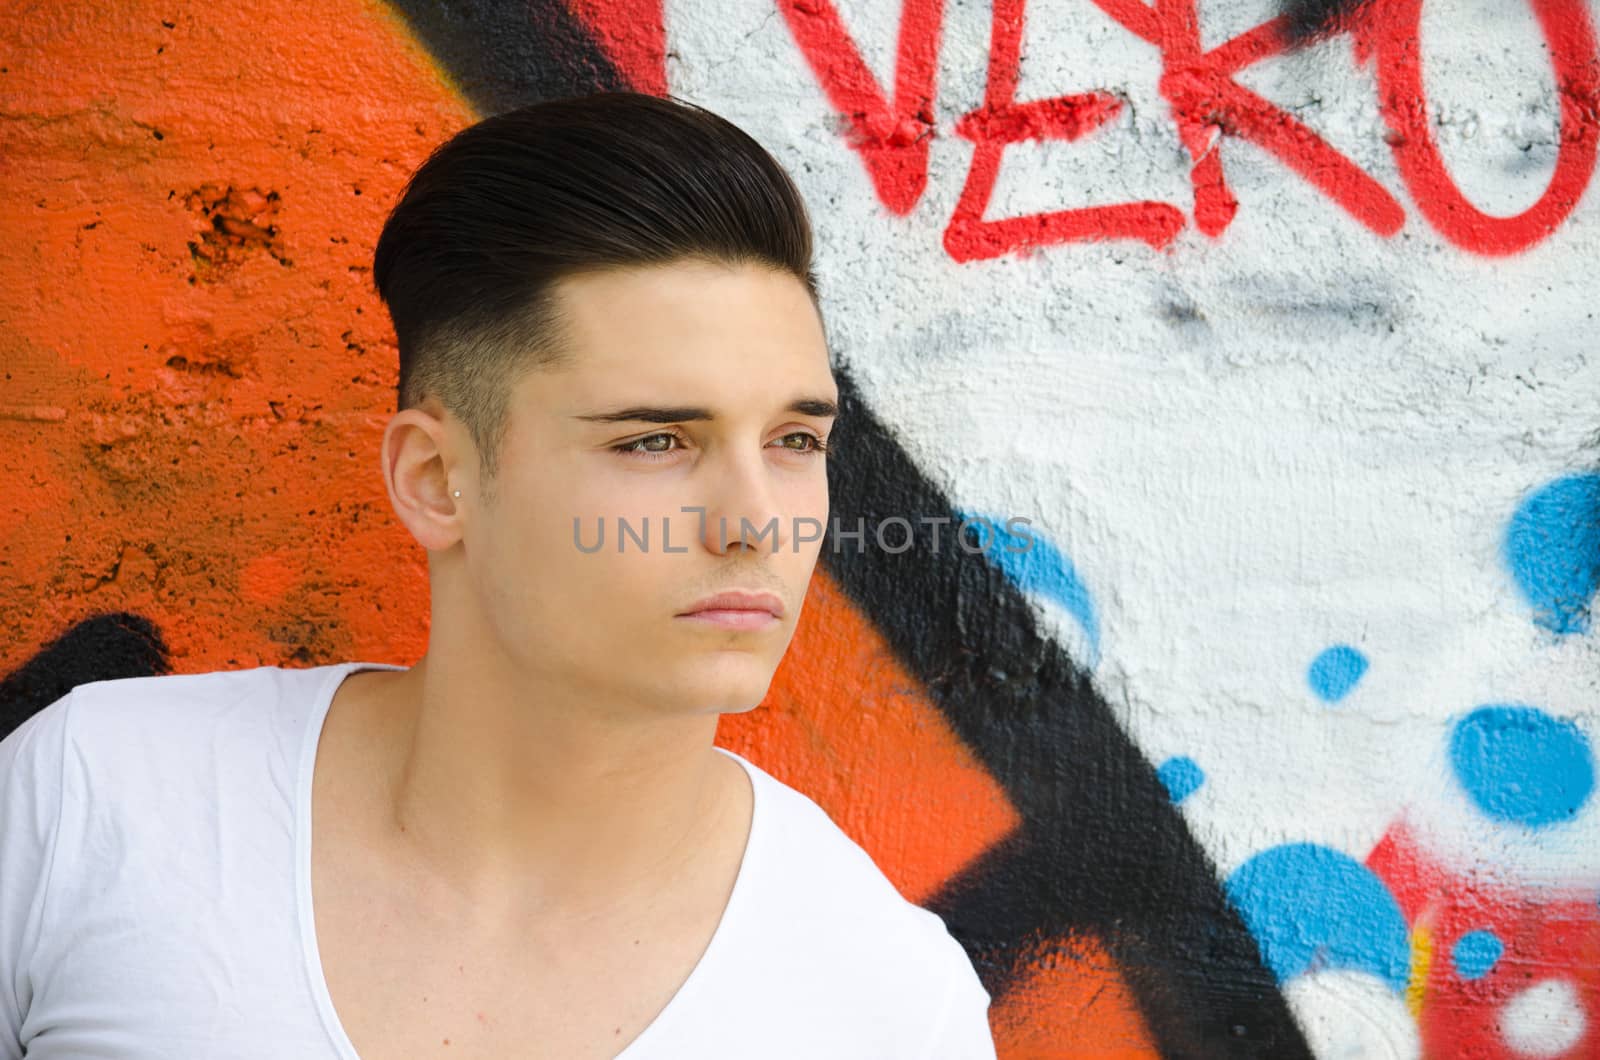 Handsome young man against colorful graffiti covered wall